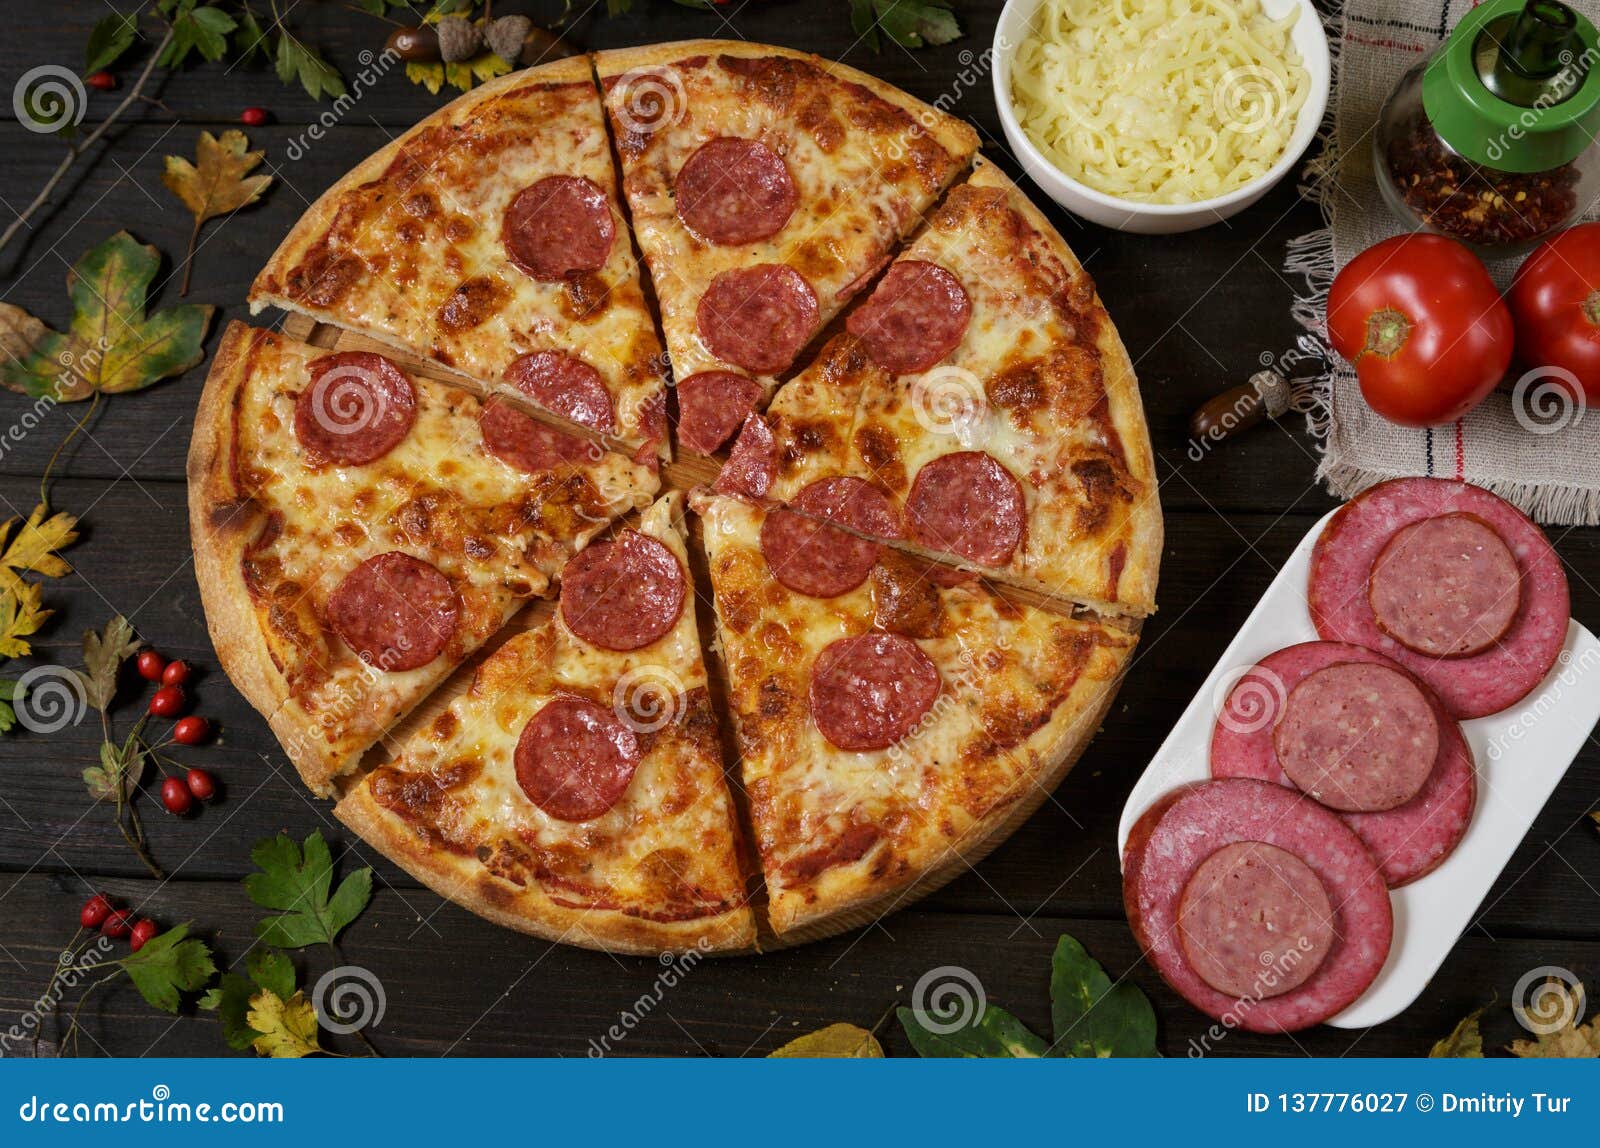 Pizza Pepperoni with Salami Stock Image - Image of lunch, parsley ...